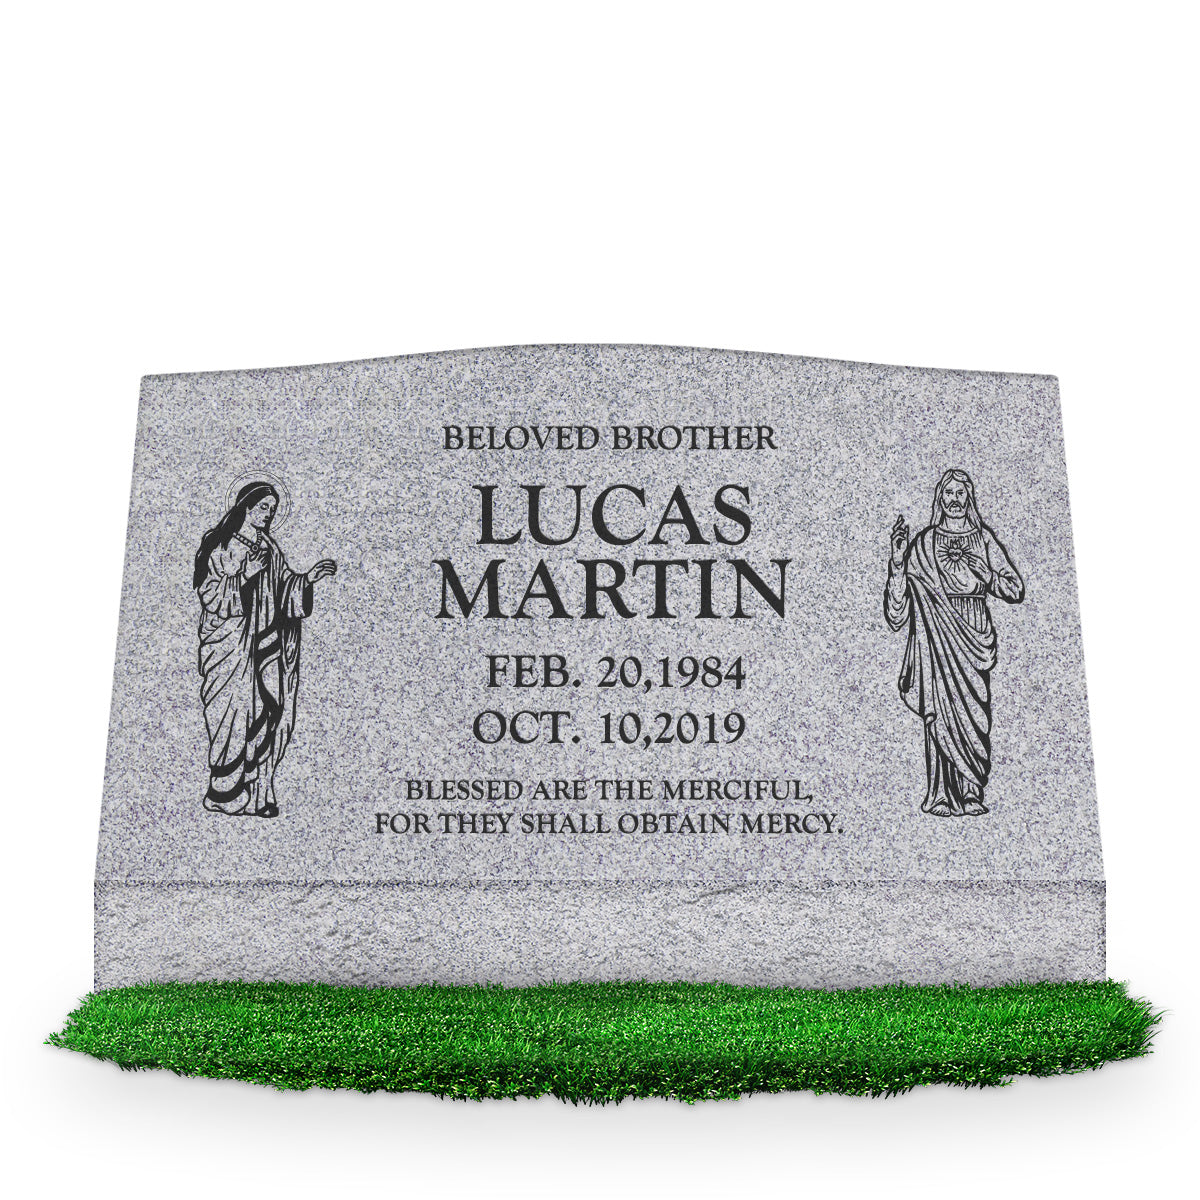 30″ x 10″ x 16″ Serp Top Slant Headstone: polished front and back; Single/Artwork